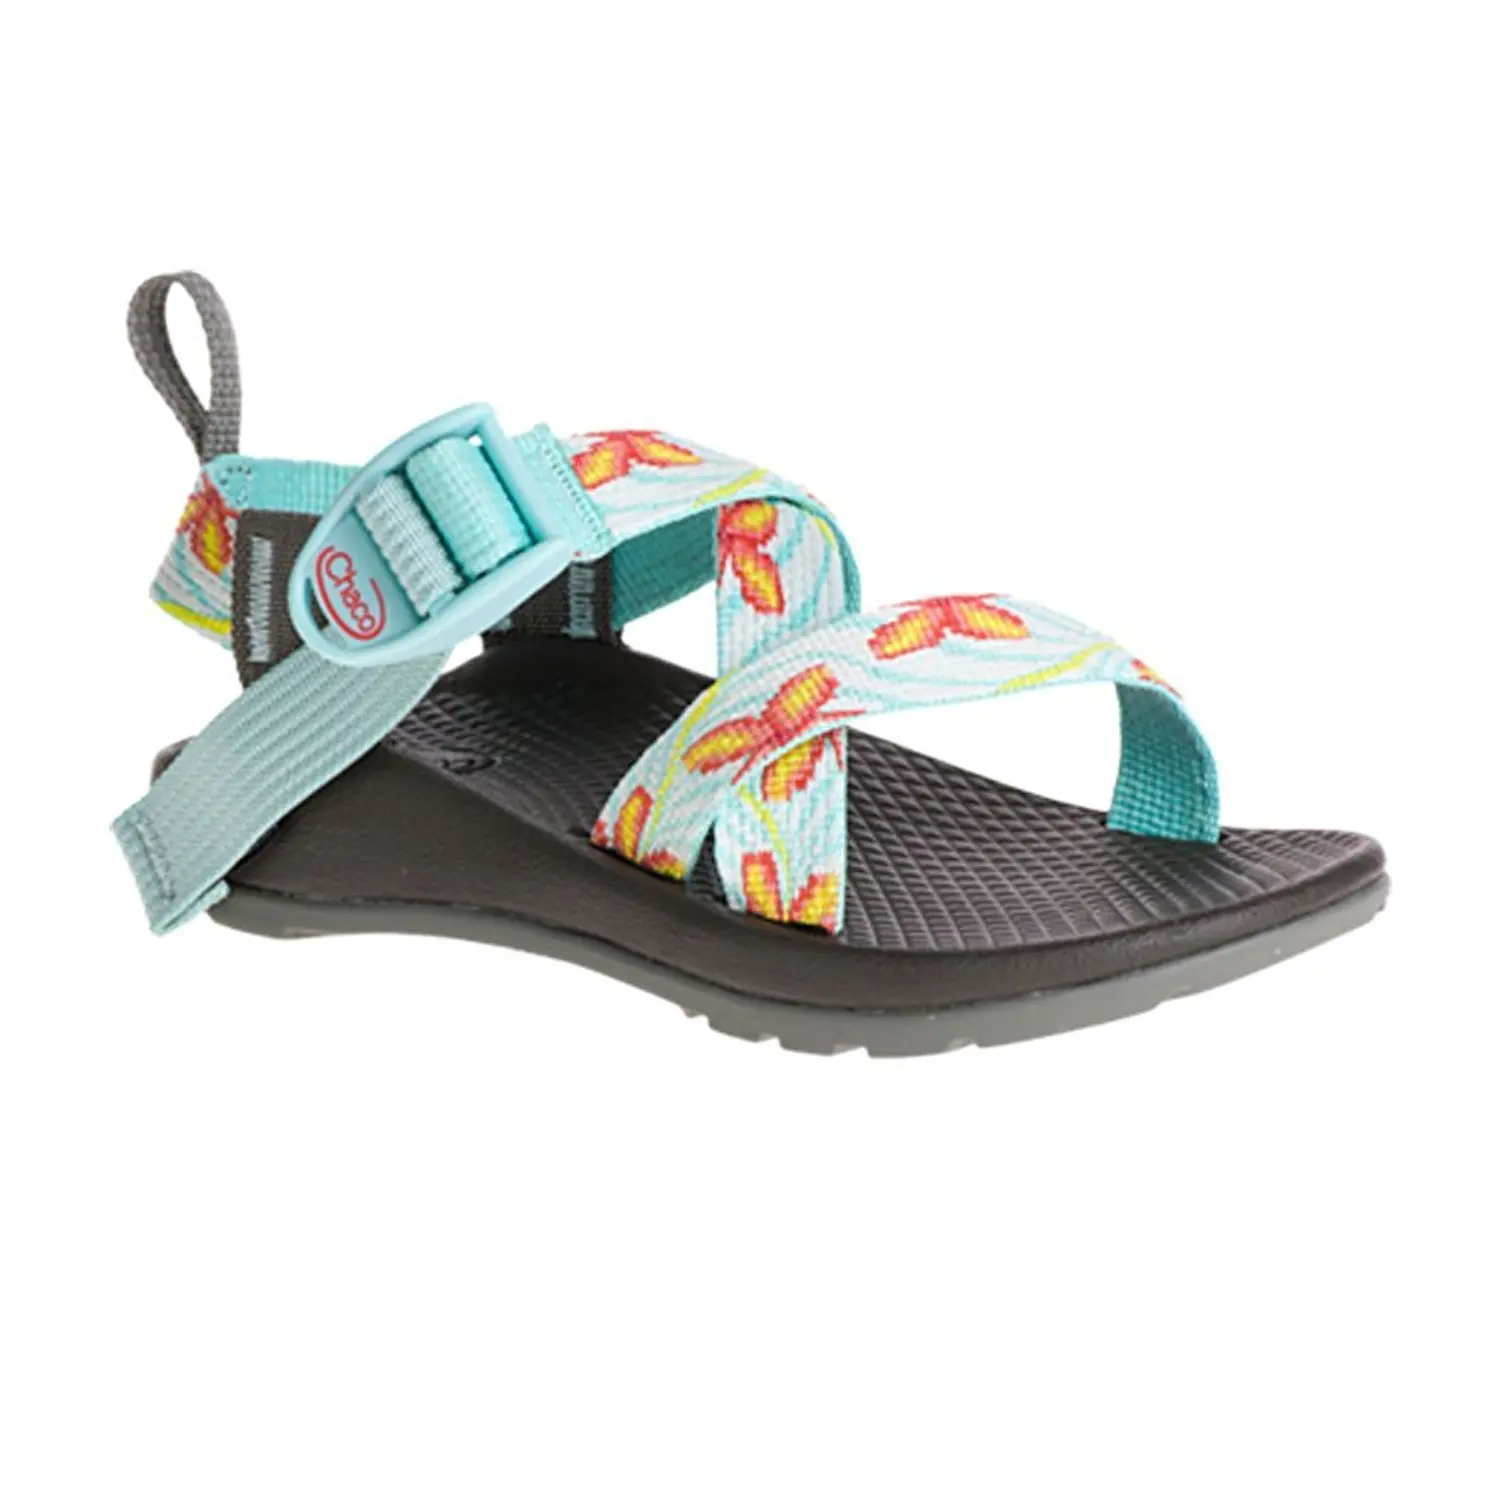 Cheap Chaco Sandals, find Chaco Sandals 